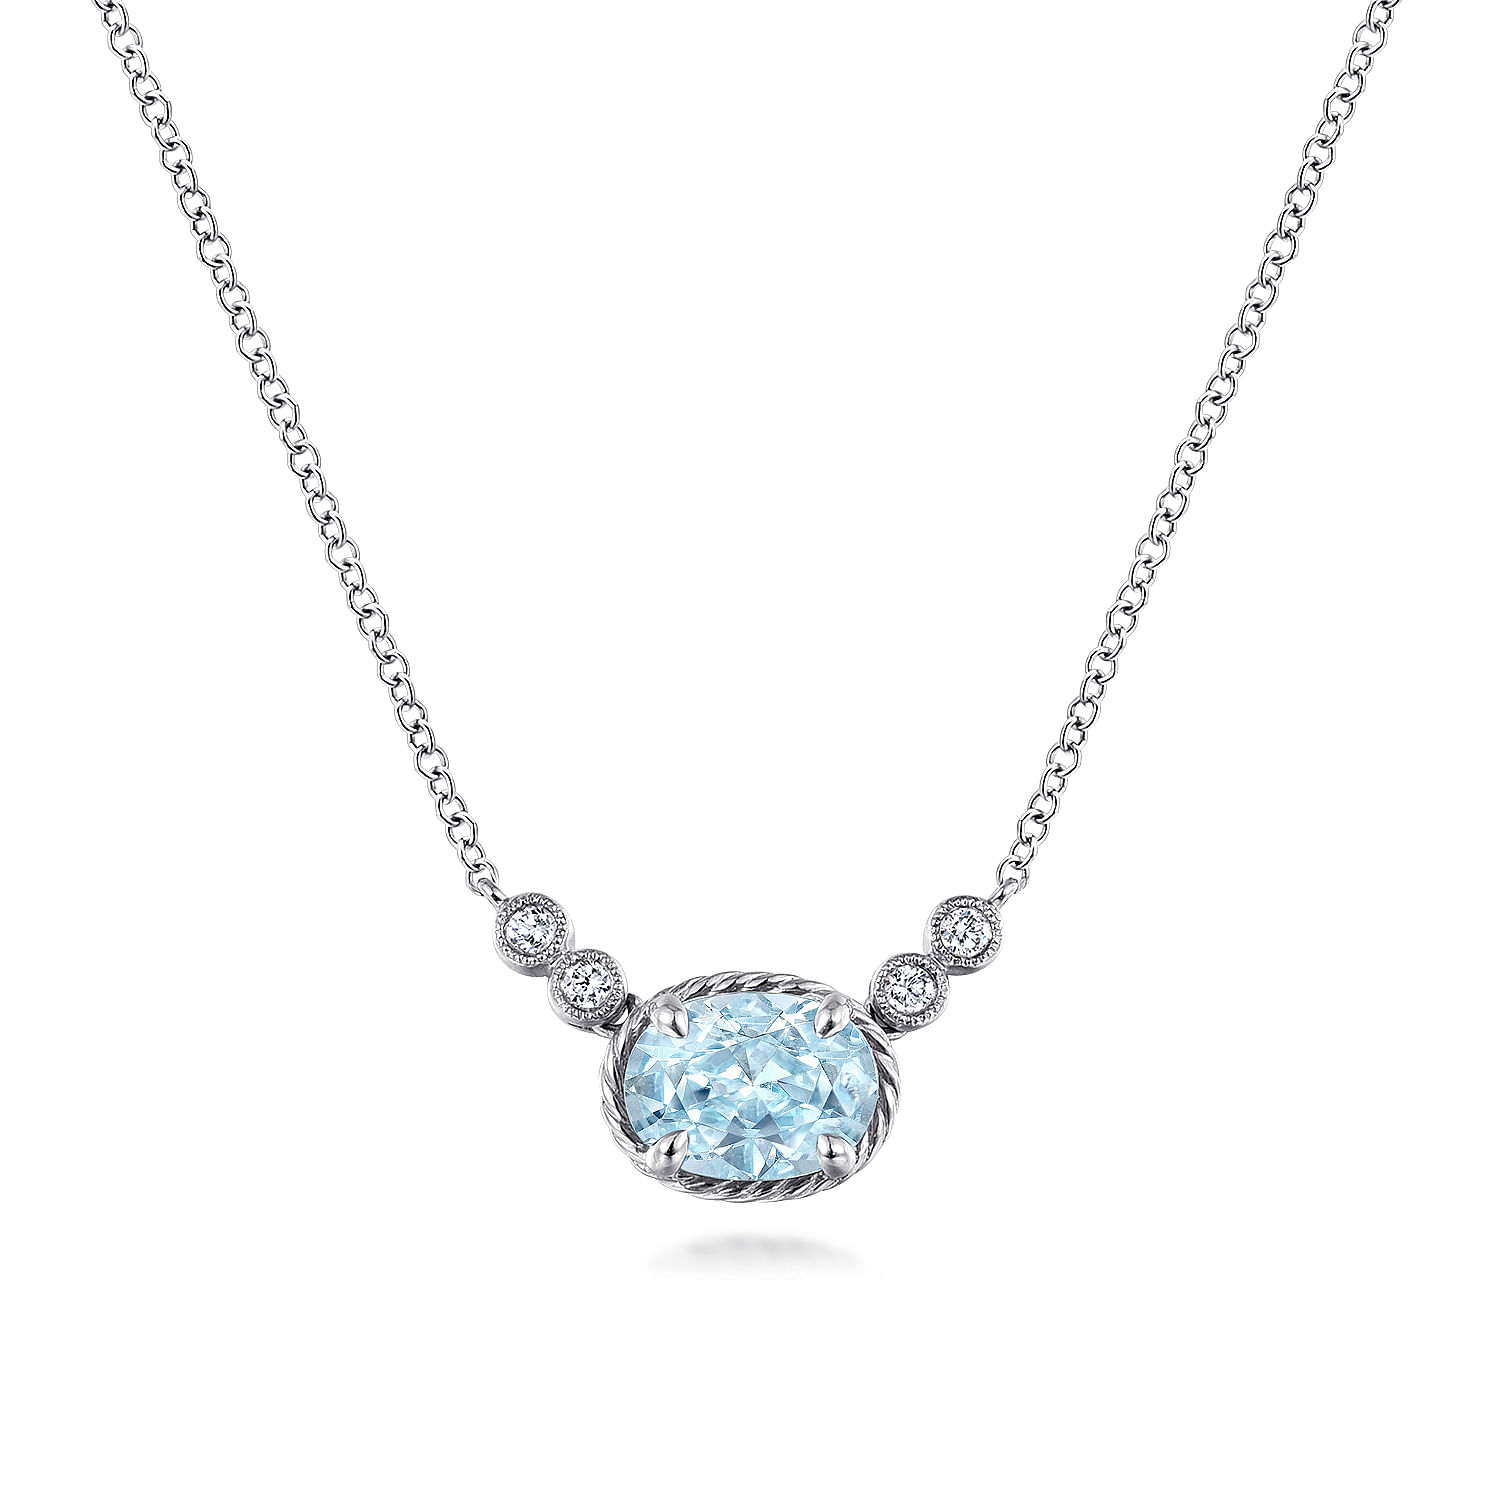 14K White Gold Oval Aquamarine Pendant Necklace with Diamond Accents